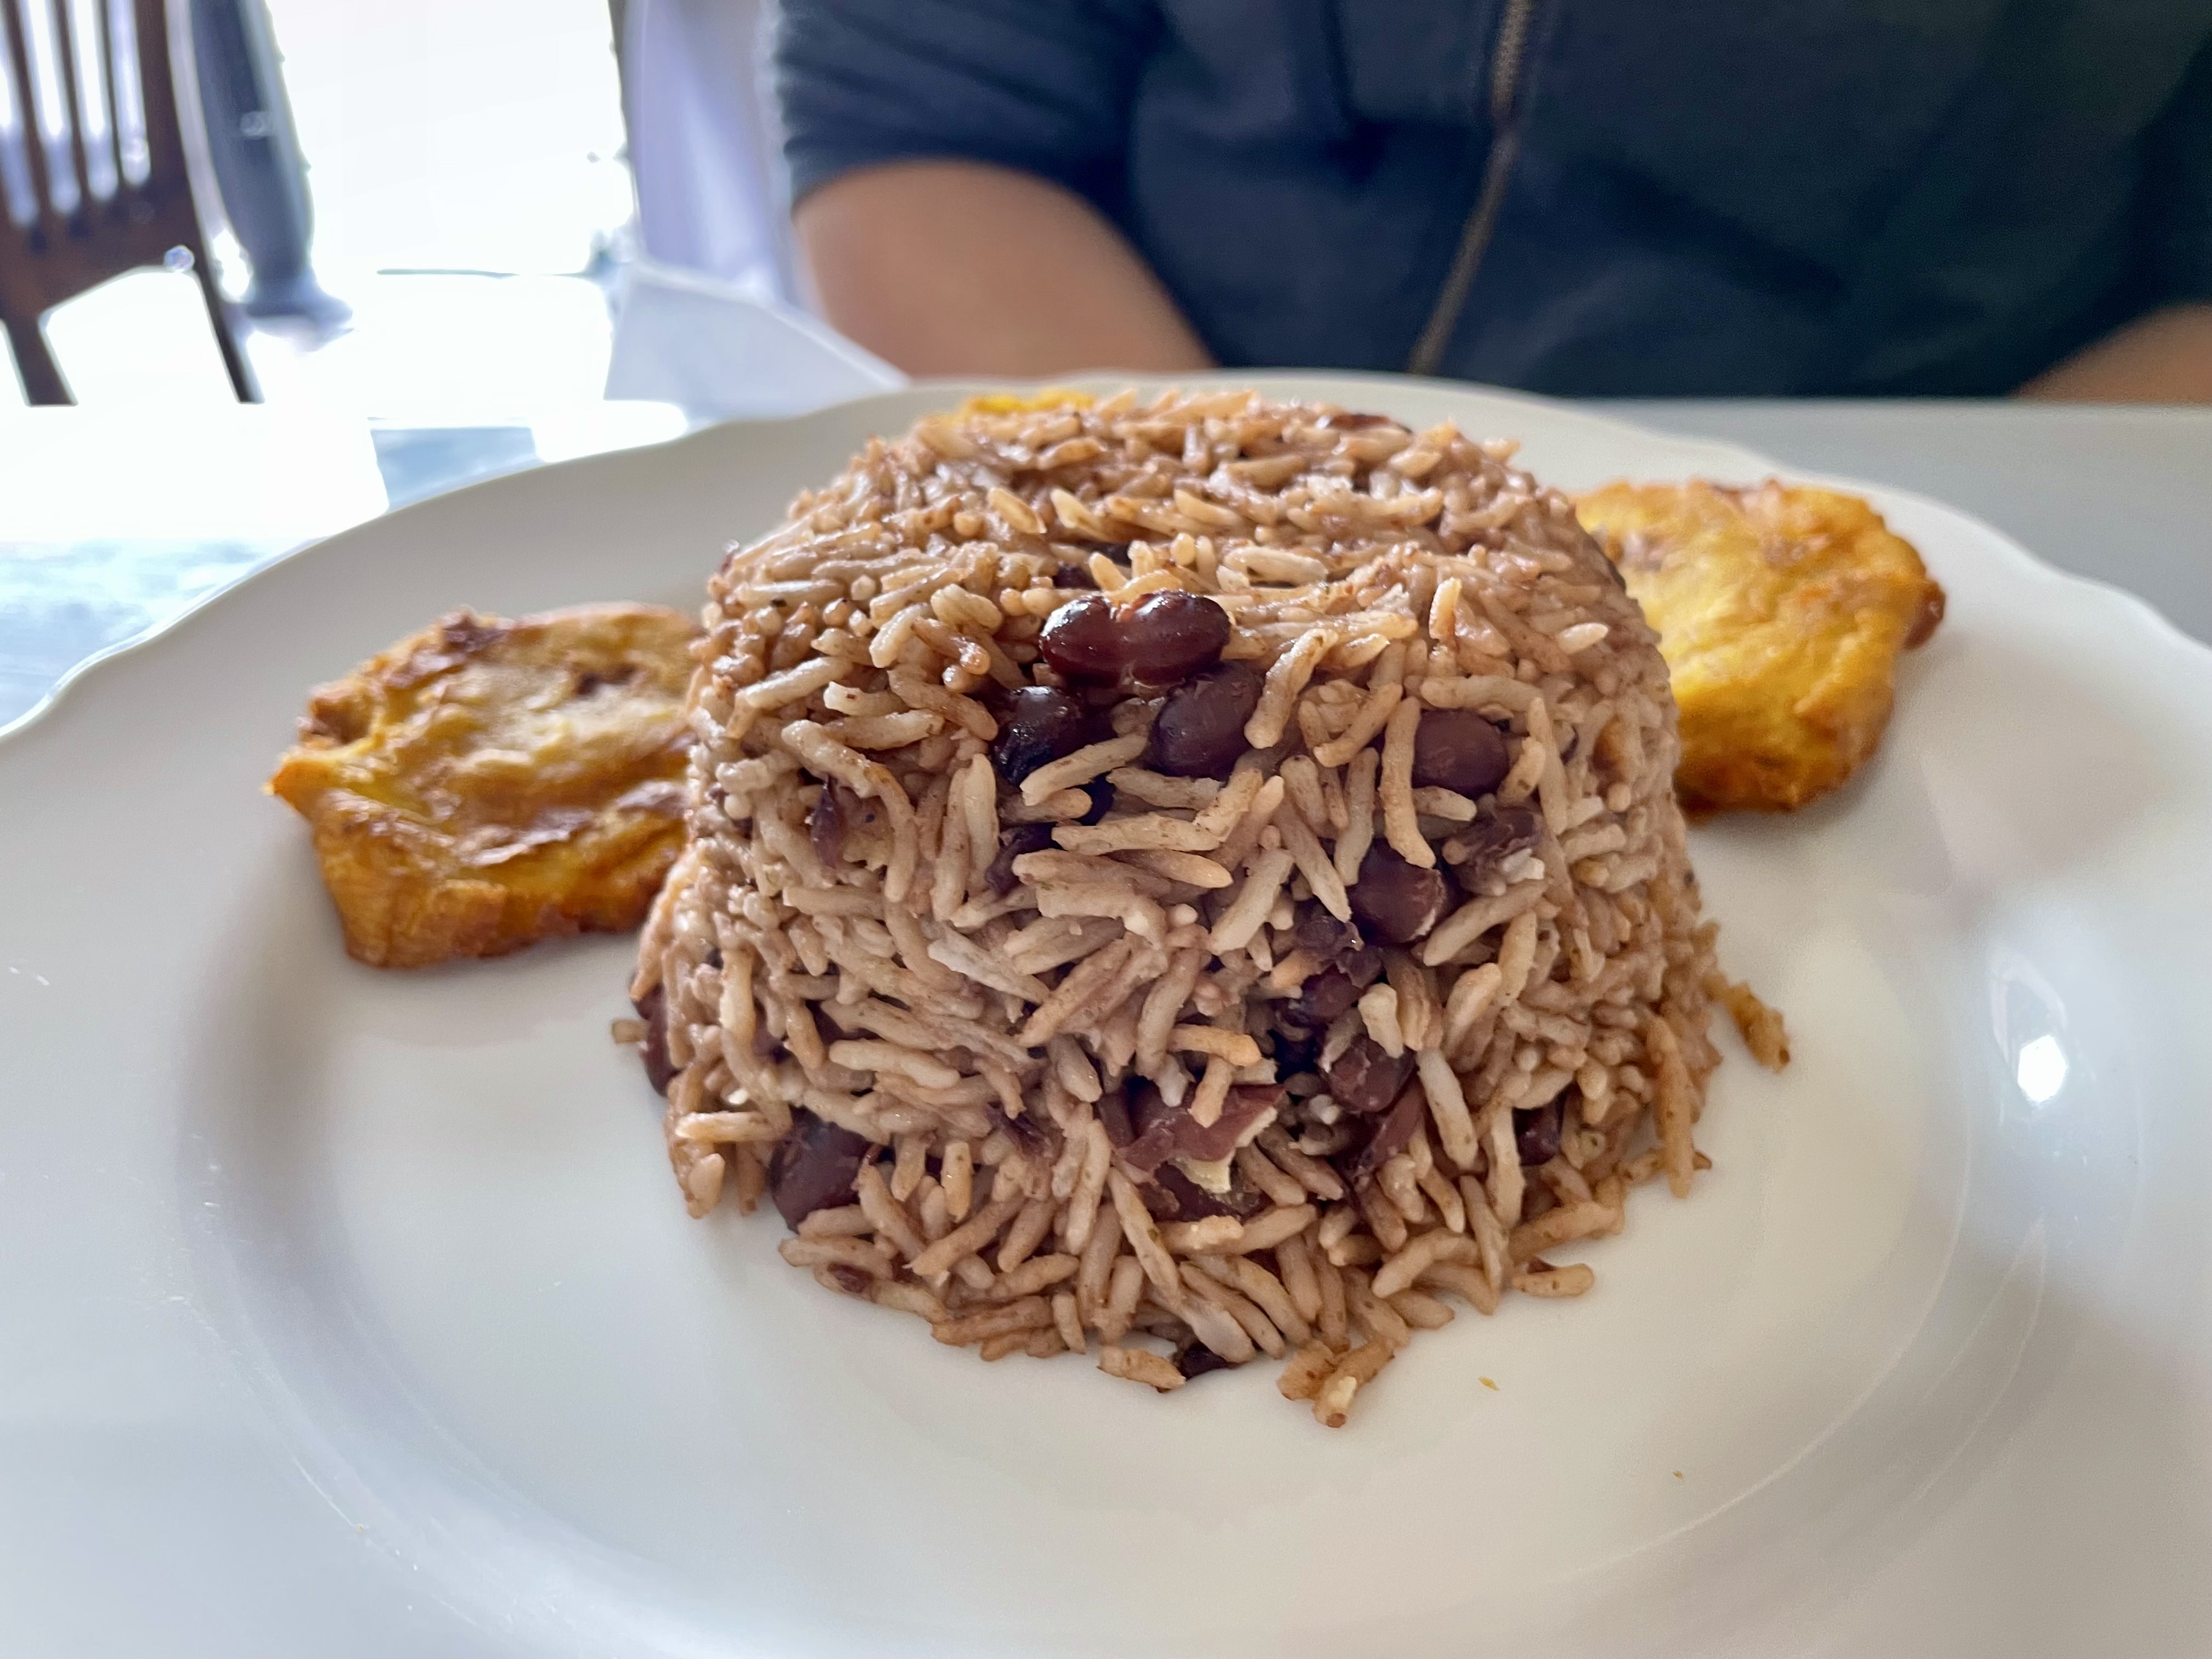 The oxtail came with rice, pinto beans, fried plantains and pikliz